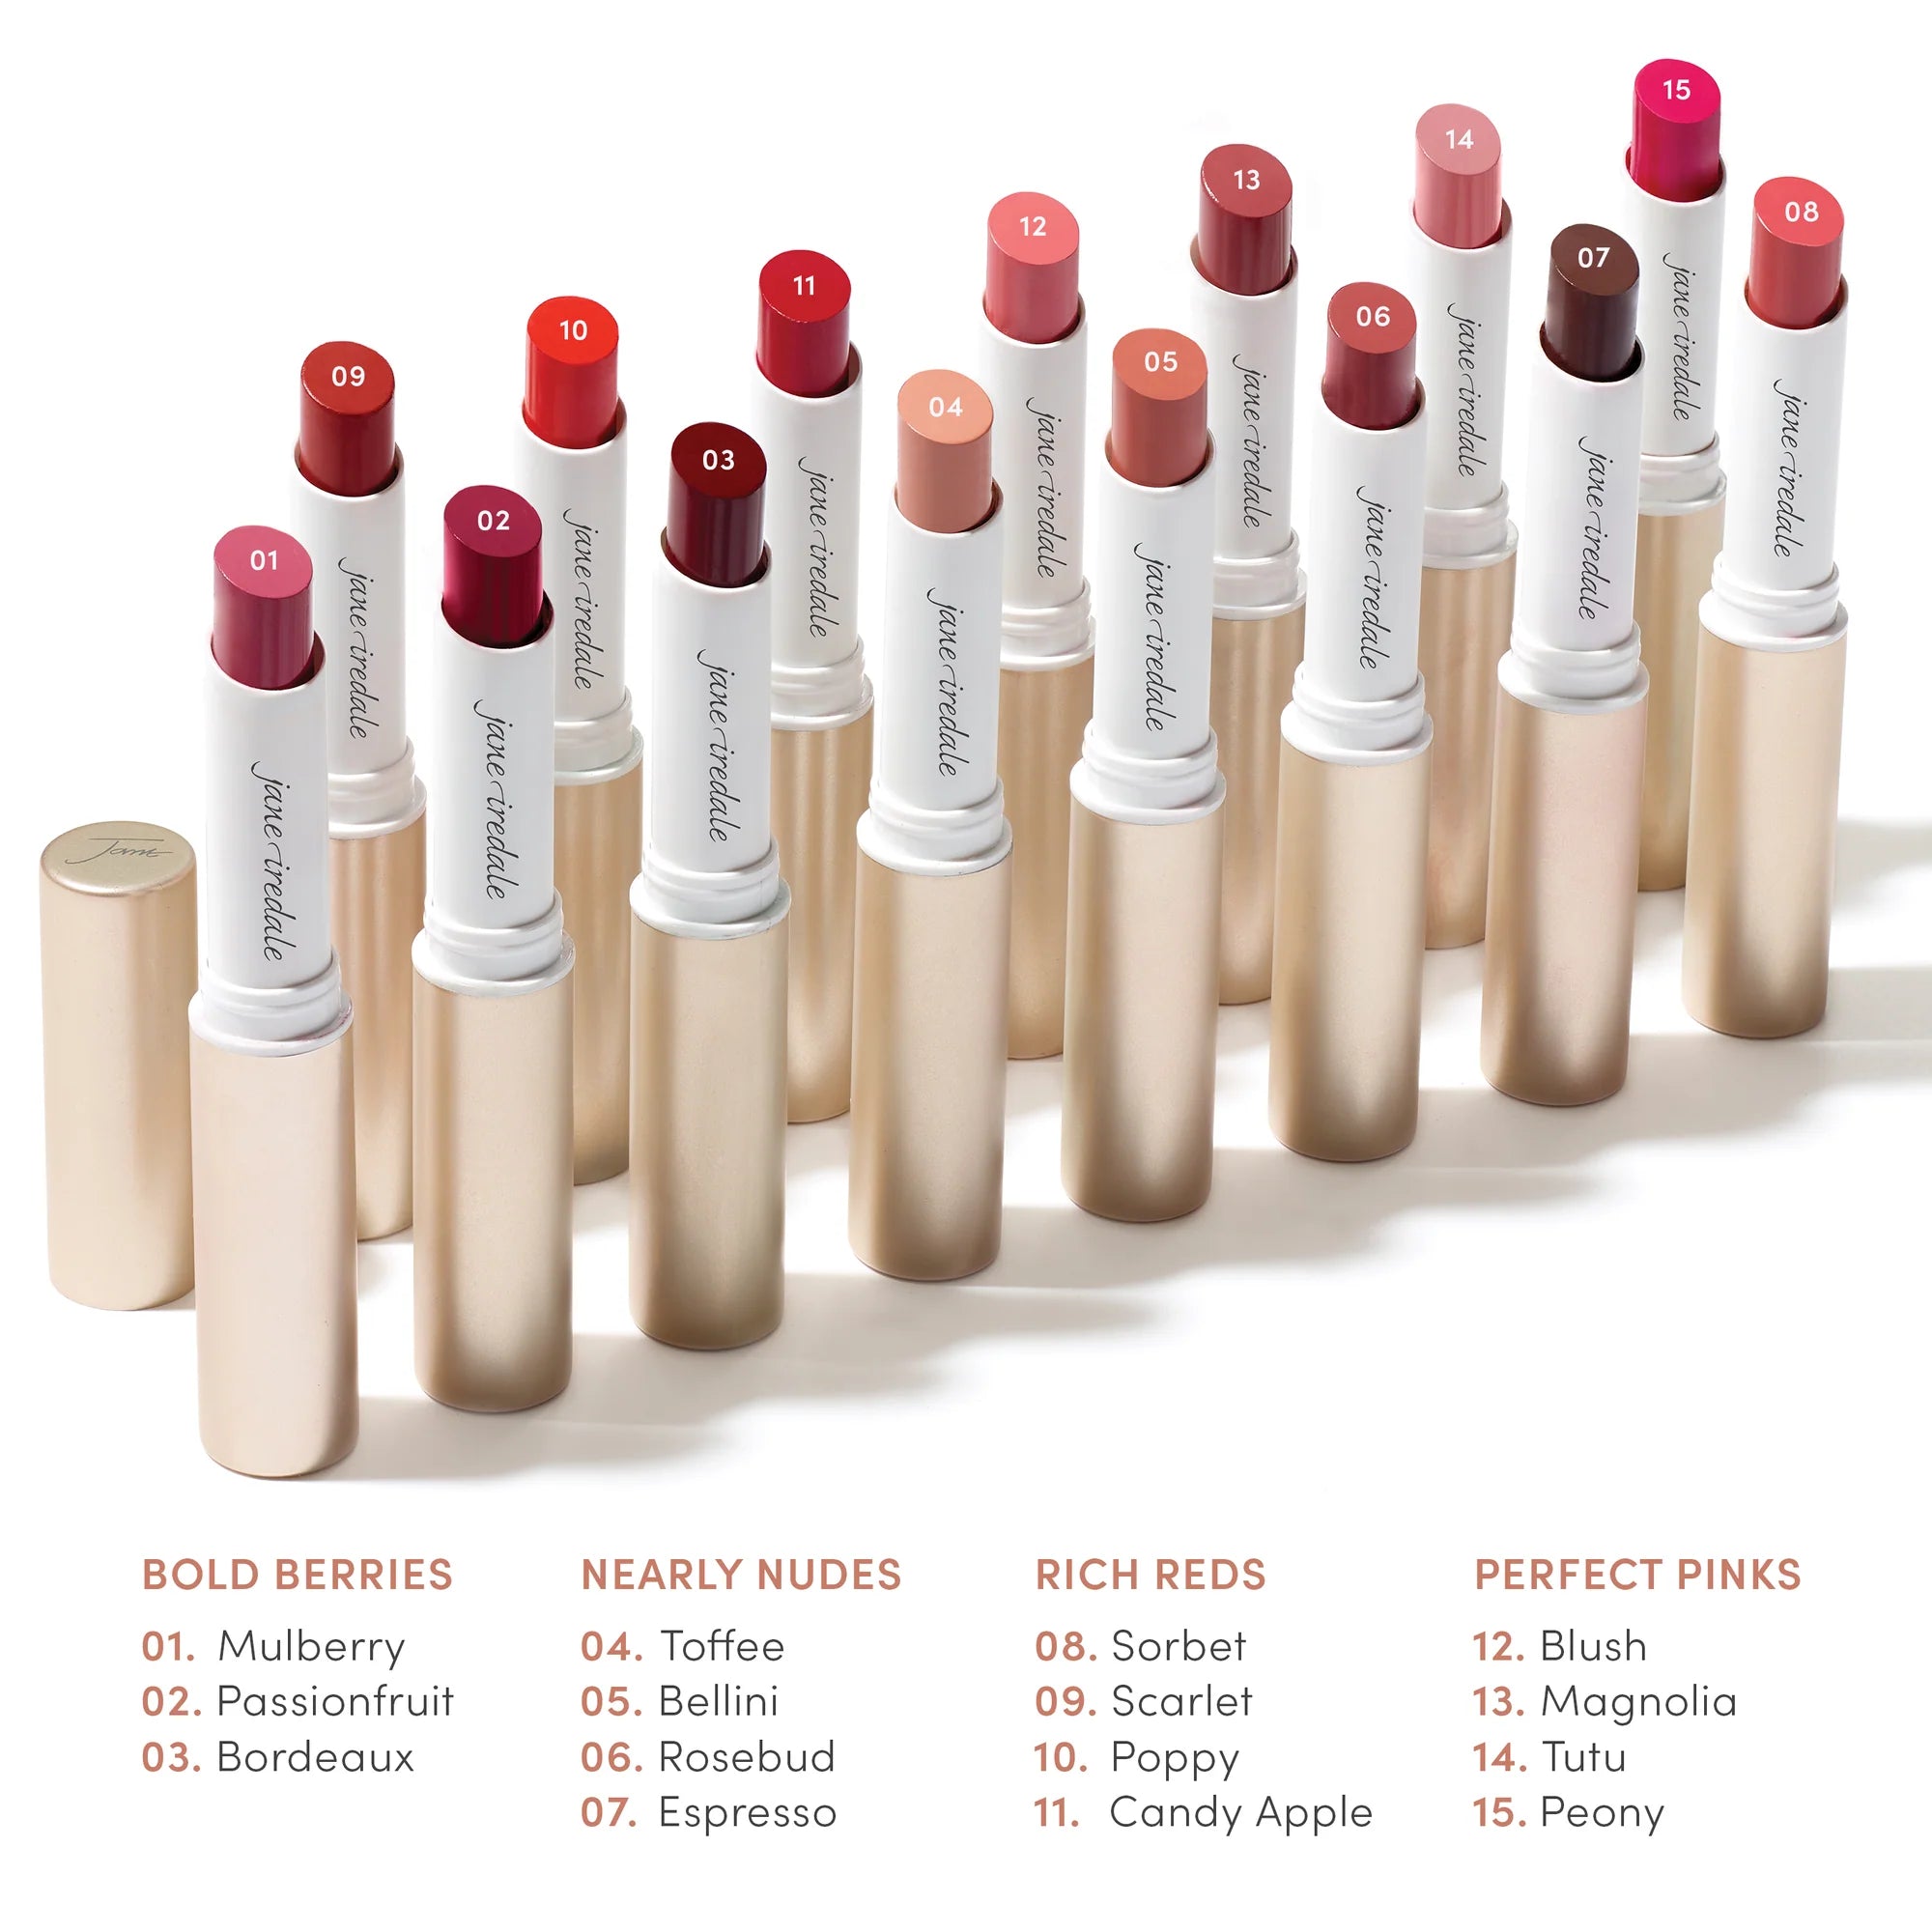 Jane Iredale's ColorLuxe Hydrating Cream Lipstick Shade Categories